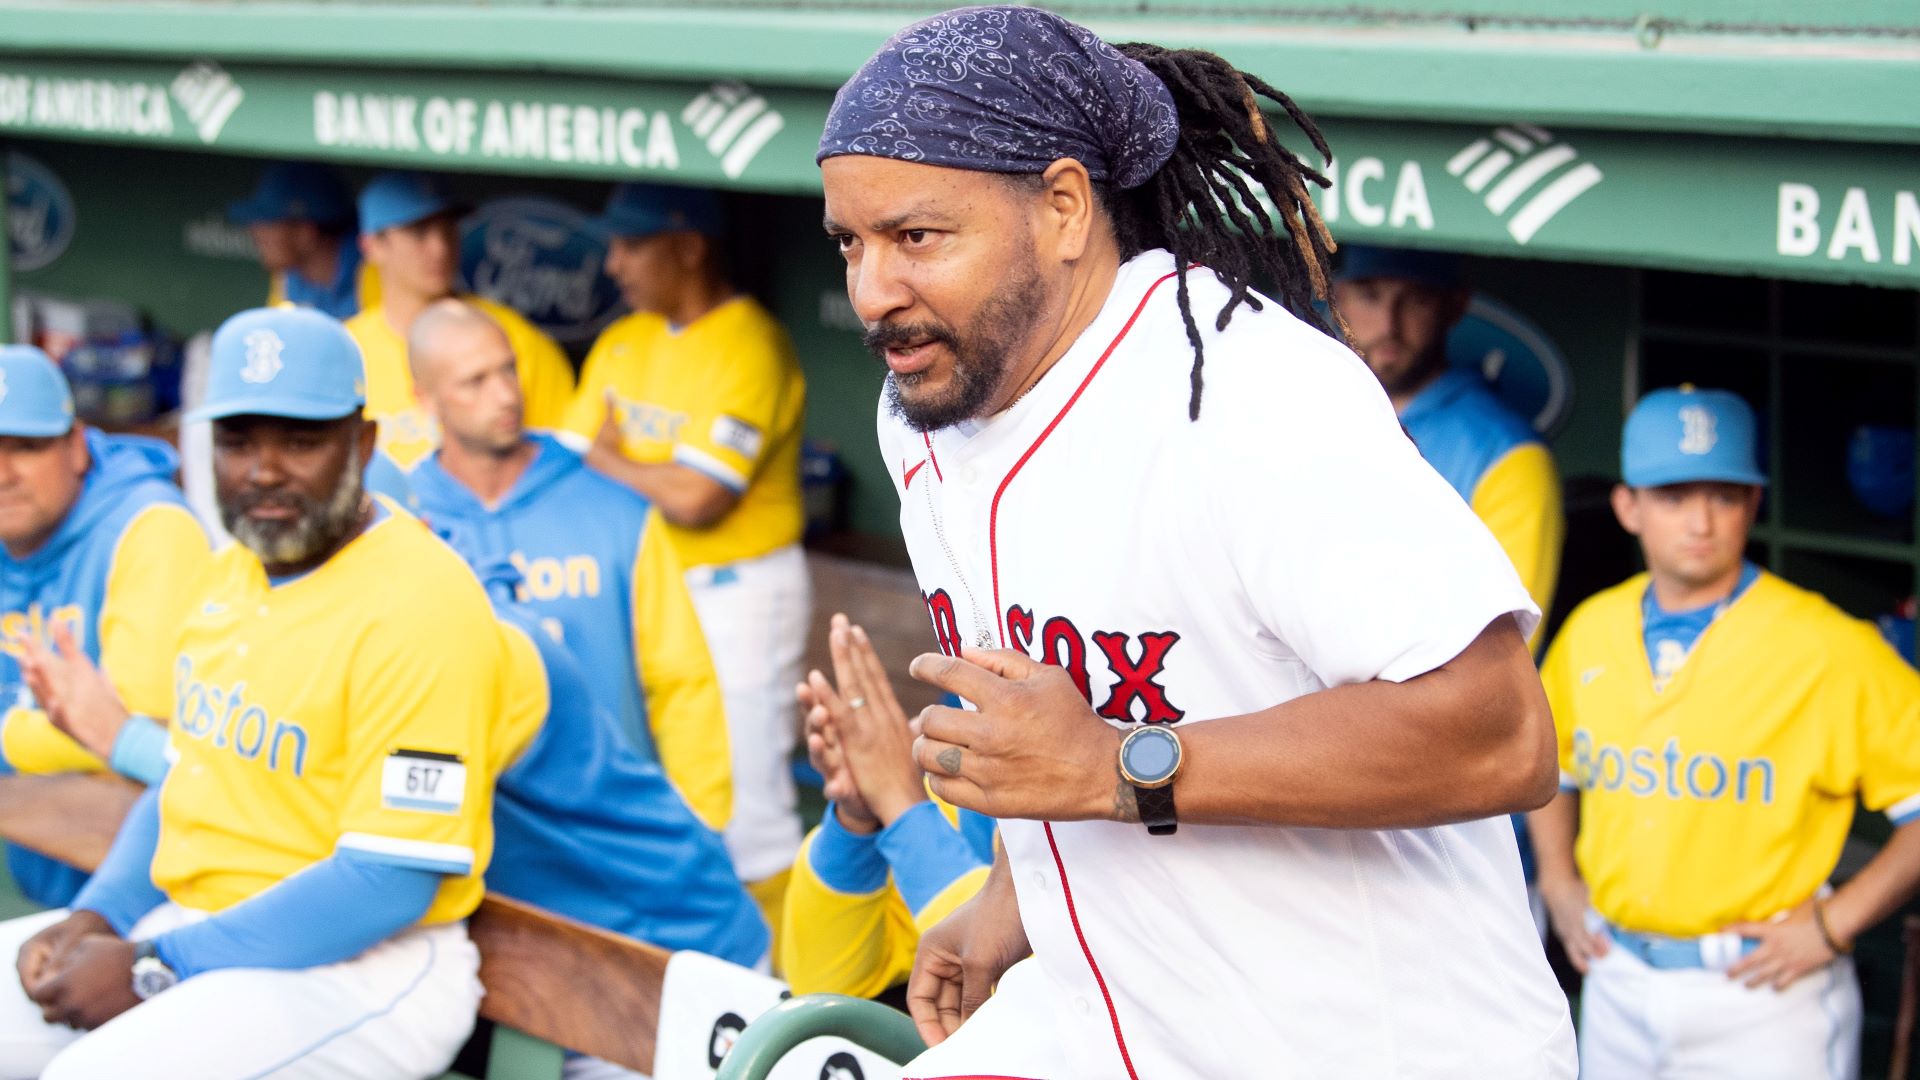 All-Time Boston Red Sox Roster: Manny Ramirez - Over the Monster